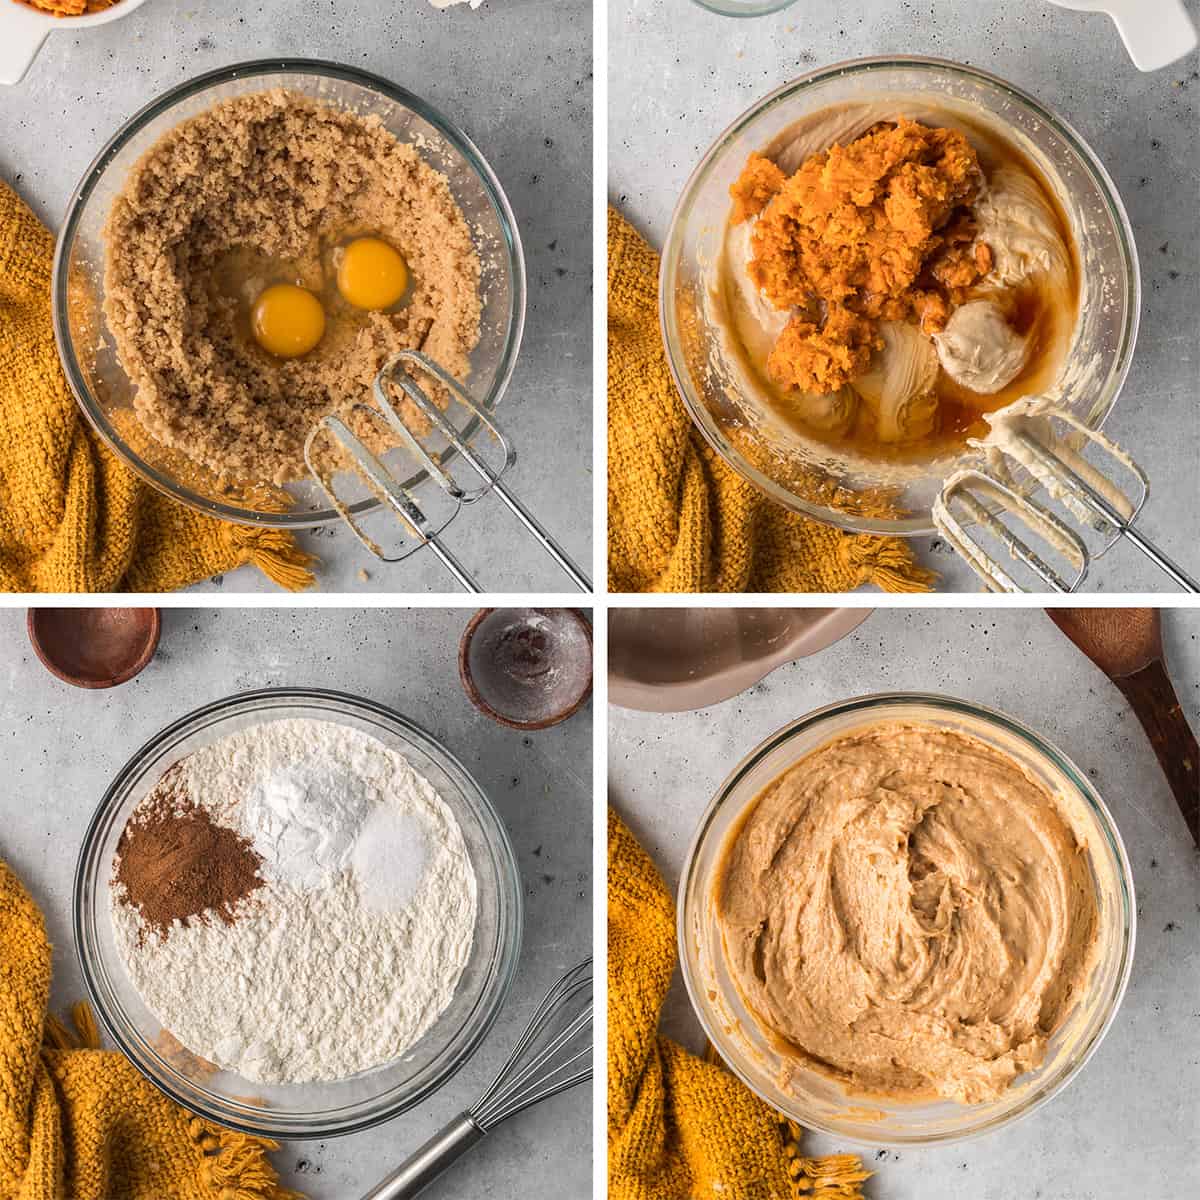 Dry ingredients are combined with sweet potato and milk in a mixing bowl.